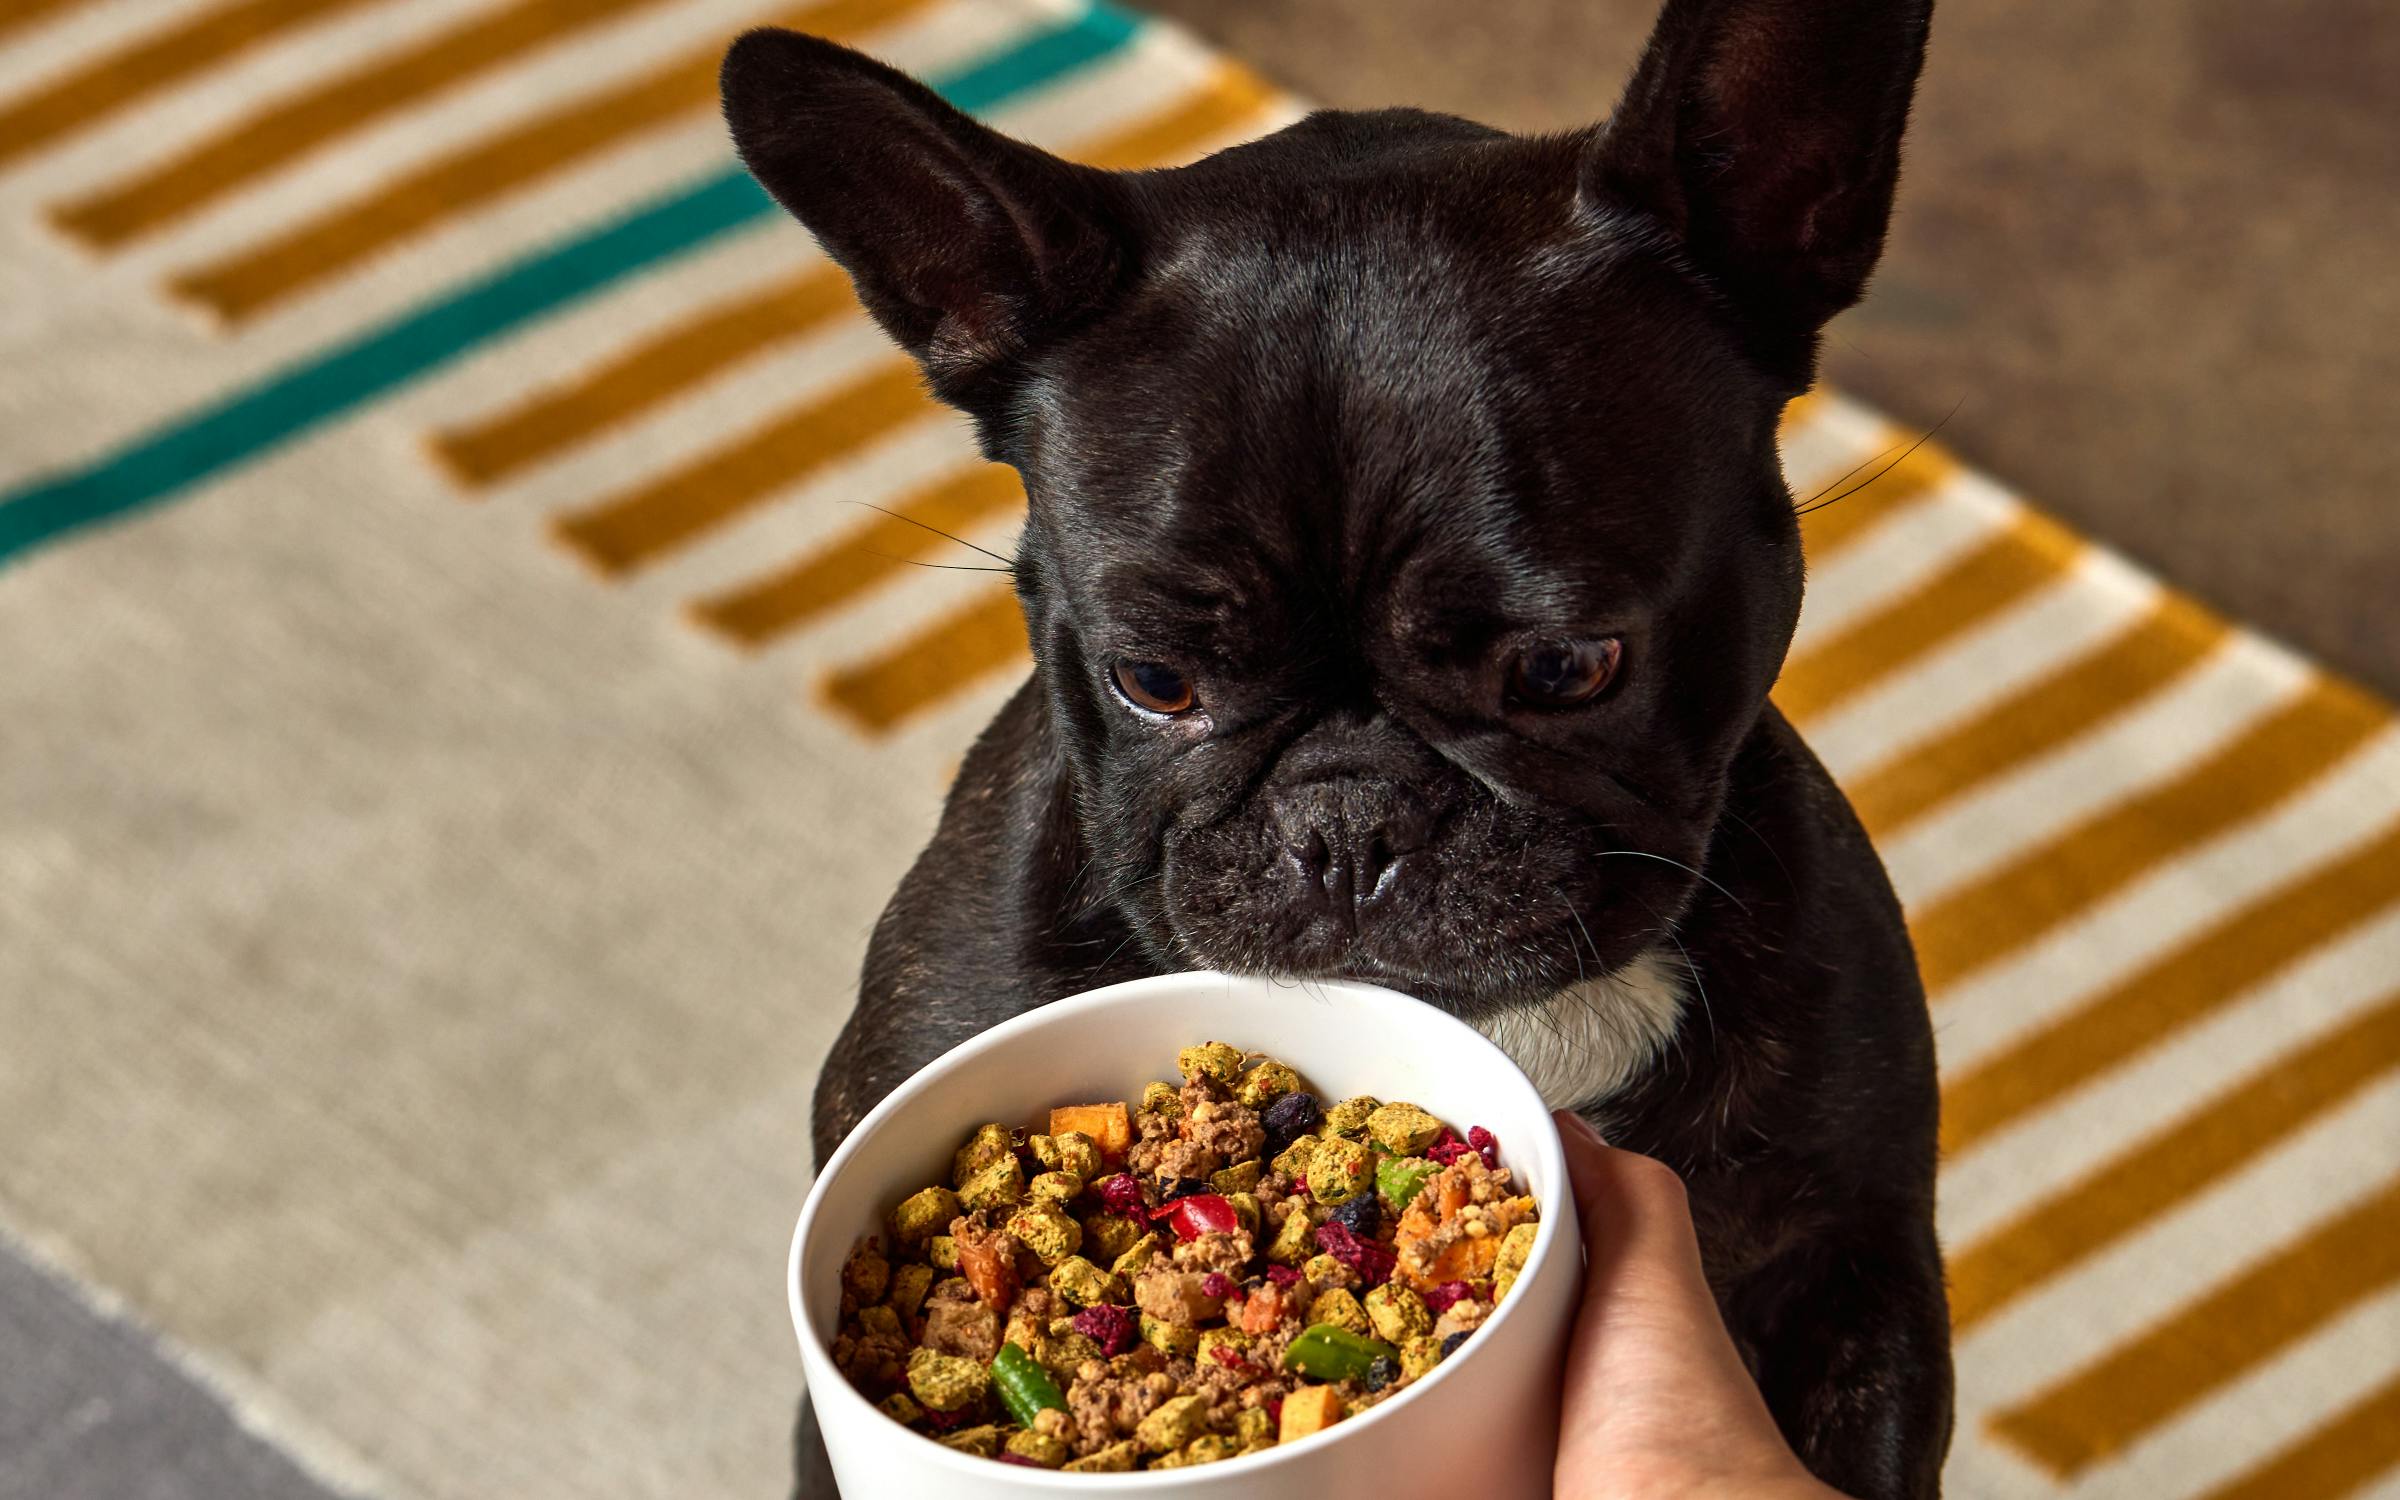 Pug looking at bowl of food with various colors